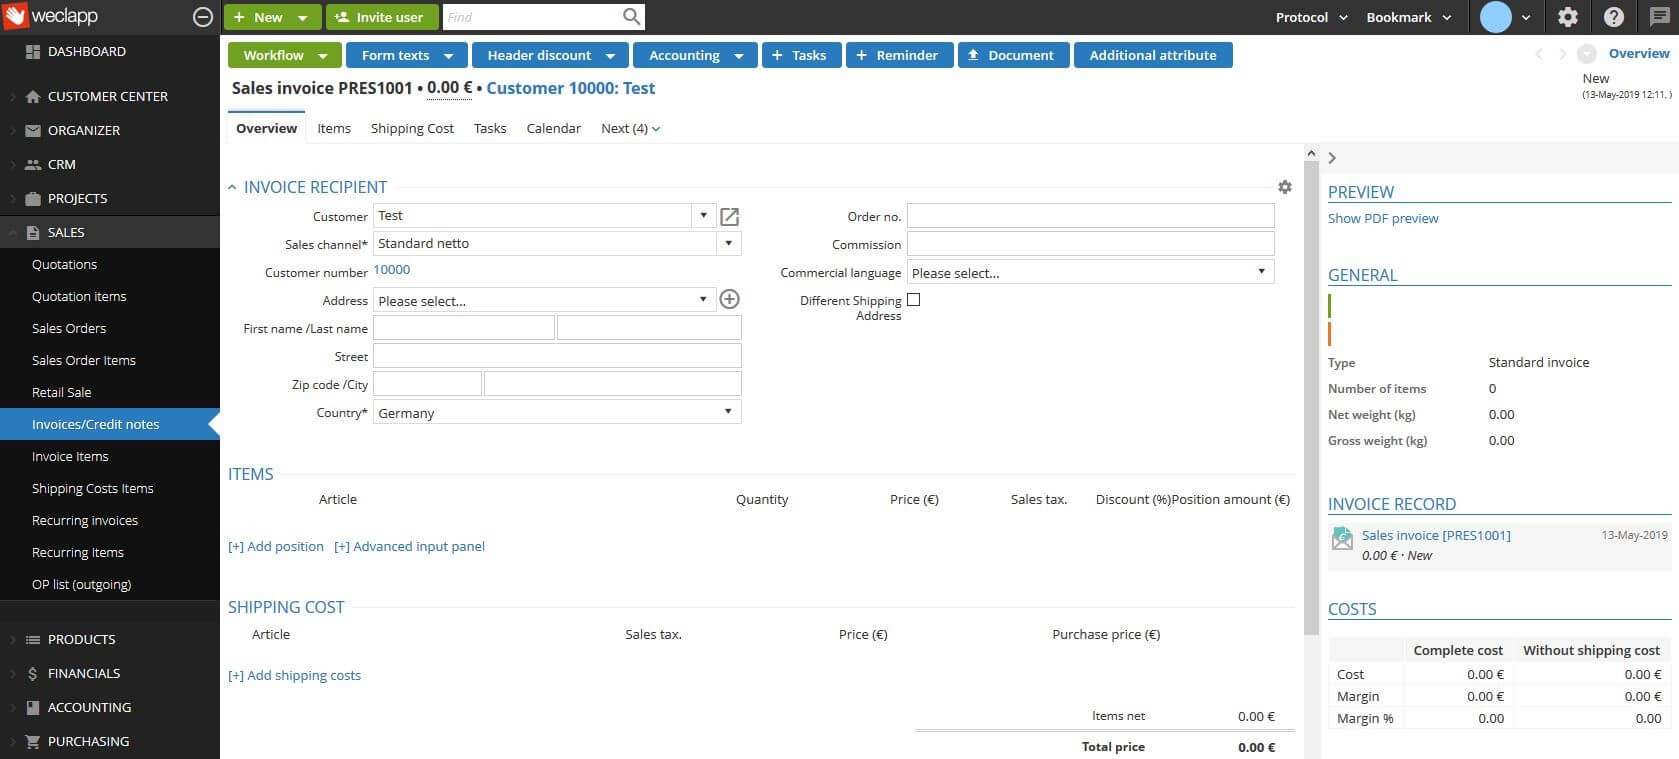 Invoicing in the weclapp web application